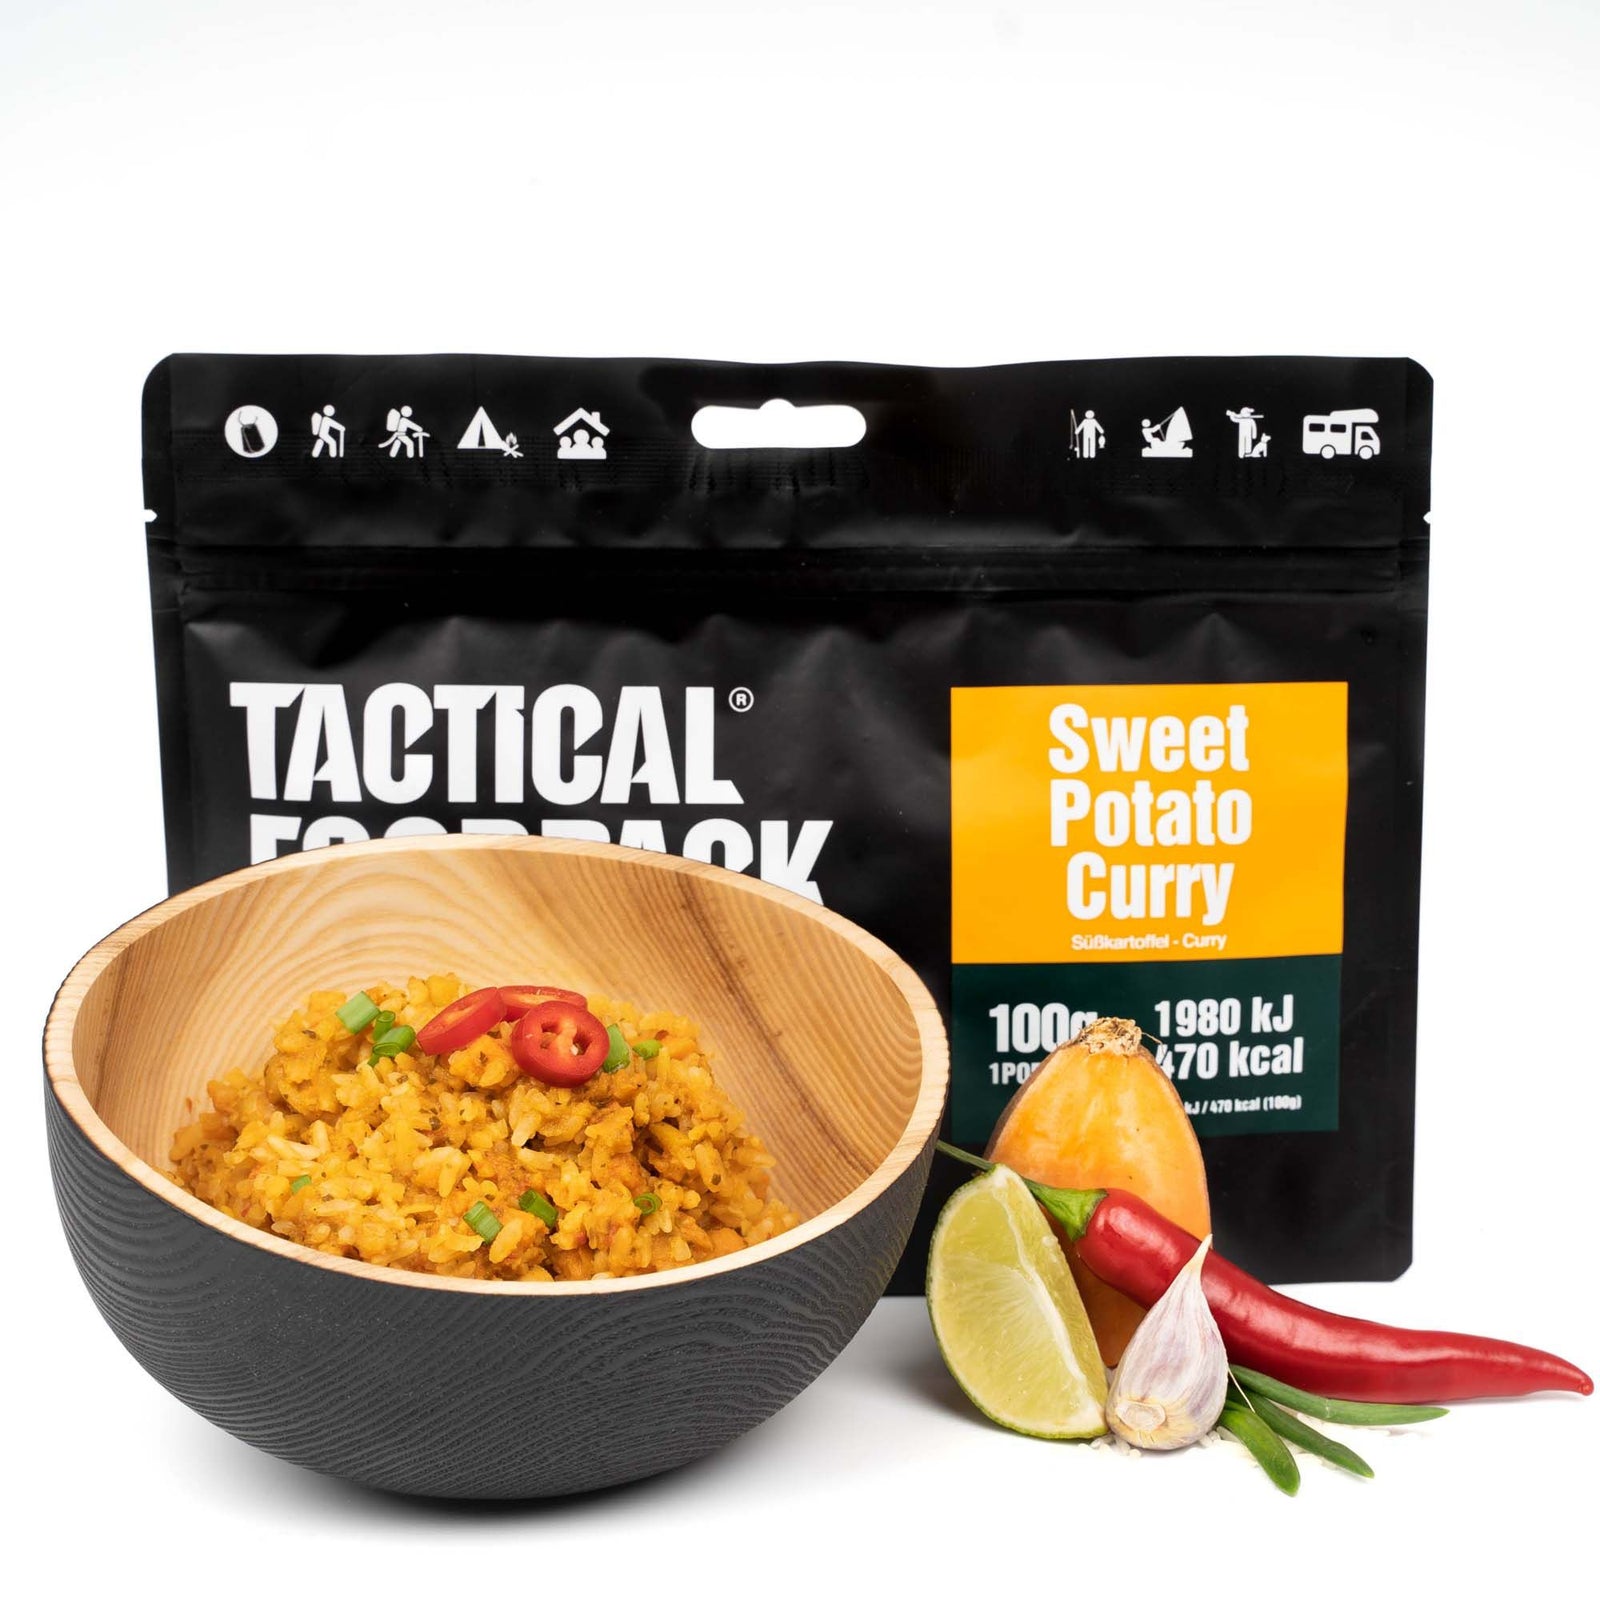 Tactical Foodpack | Sweet Potato Curry 100g - Curry di patate dolci